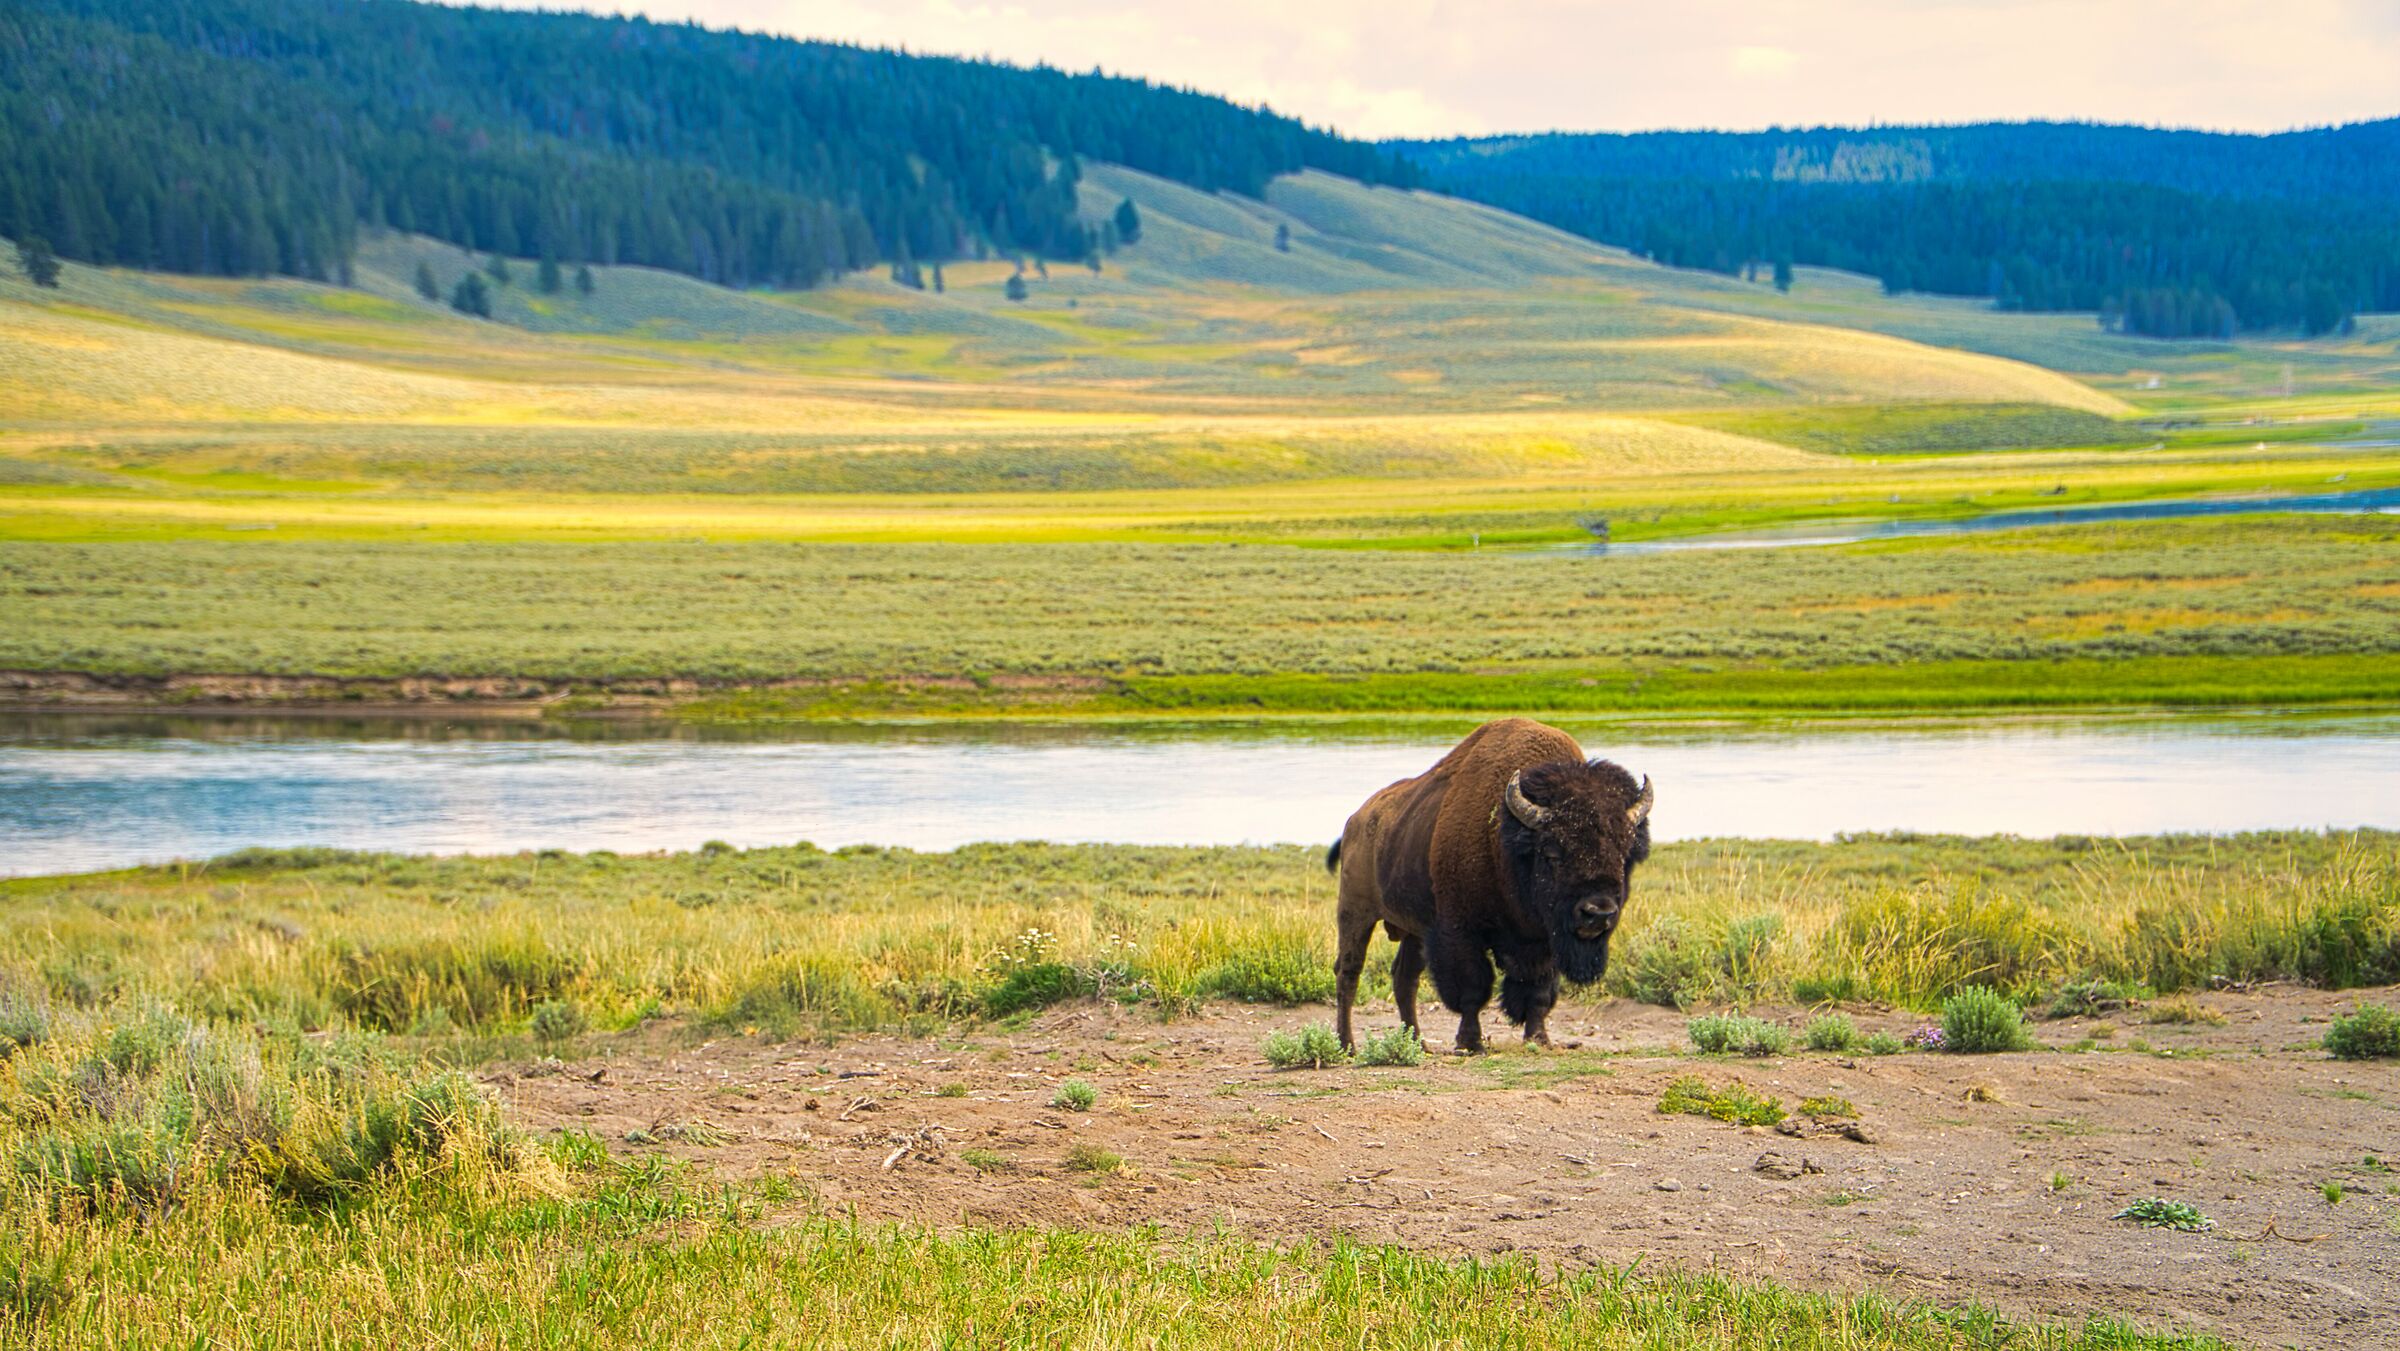 Bison in Yellowstone...